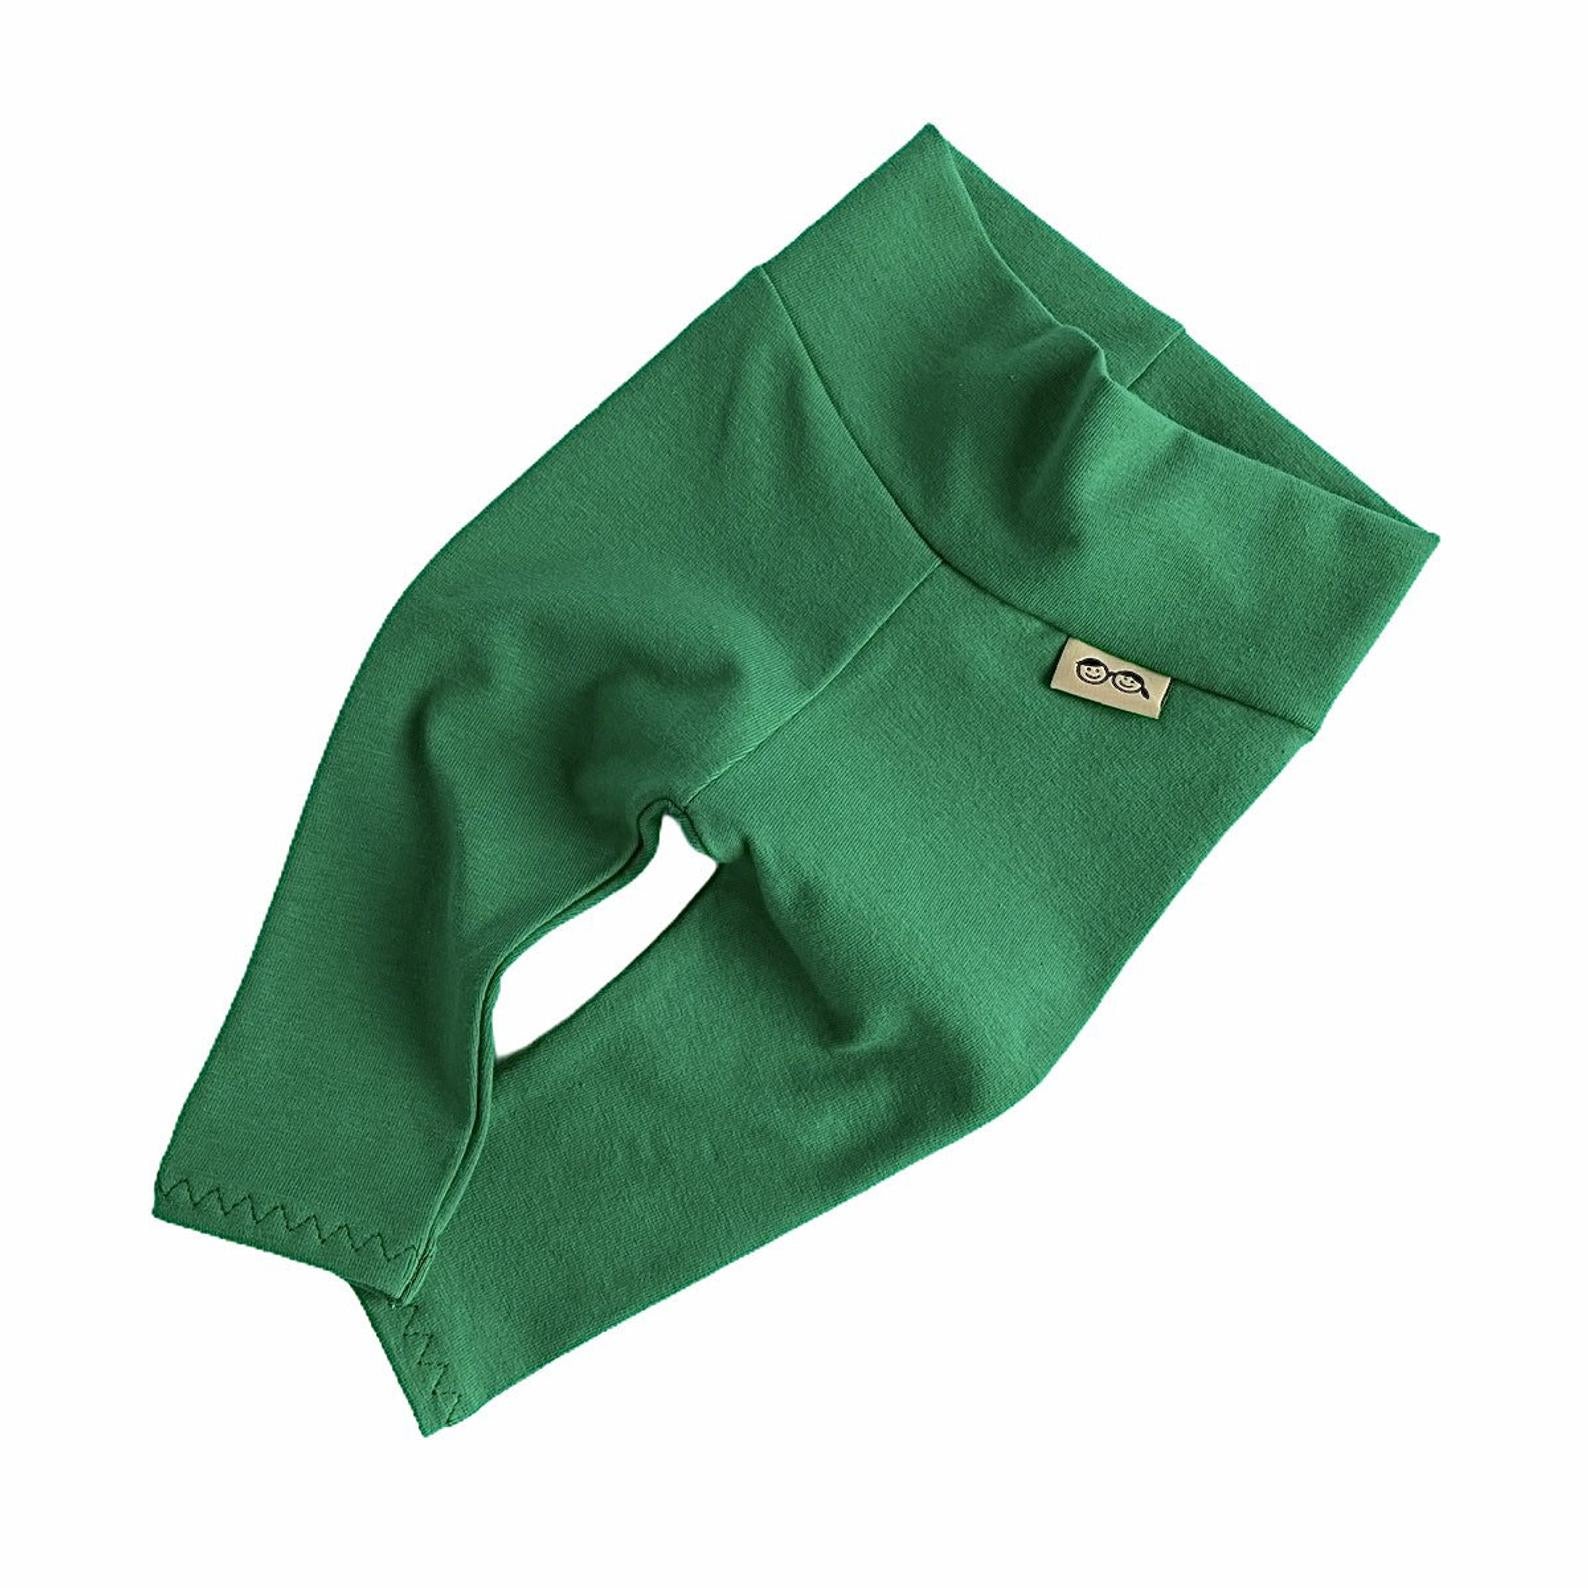 Green Leggings and/or Beanie Knot Hat